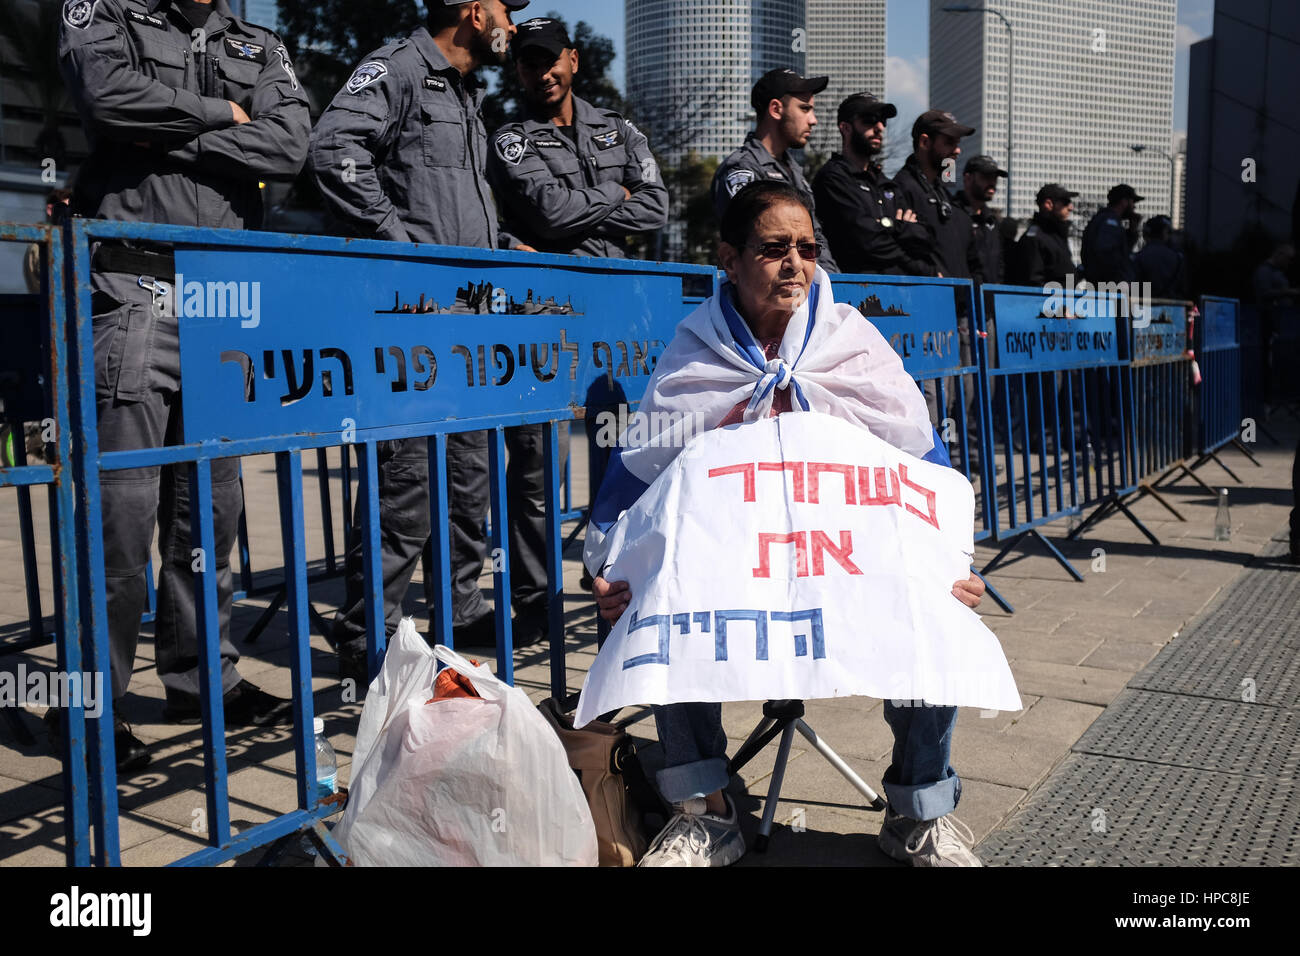 Tel Aviv, Israel. 21st February, 2017. Supporters of IDF Sgt. Elor Azaria, convicted of manslaughter in the March 2015 killing of Palestinian Abdel Fatah al Sharif as he lay wounded and helpless in Hebron,  demonstrate outside a military court in session at the IDF headquarters in Tel Aviv, as it hands down sentencing. Azaria was sentenced to 18 months imprisonment and demotion to private. Credit: Nir Alon/Alamy Live News Stock Photo